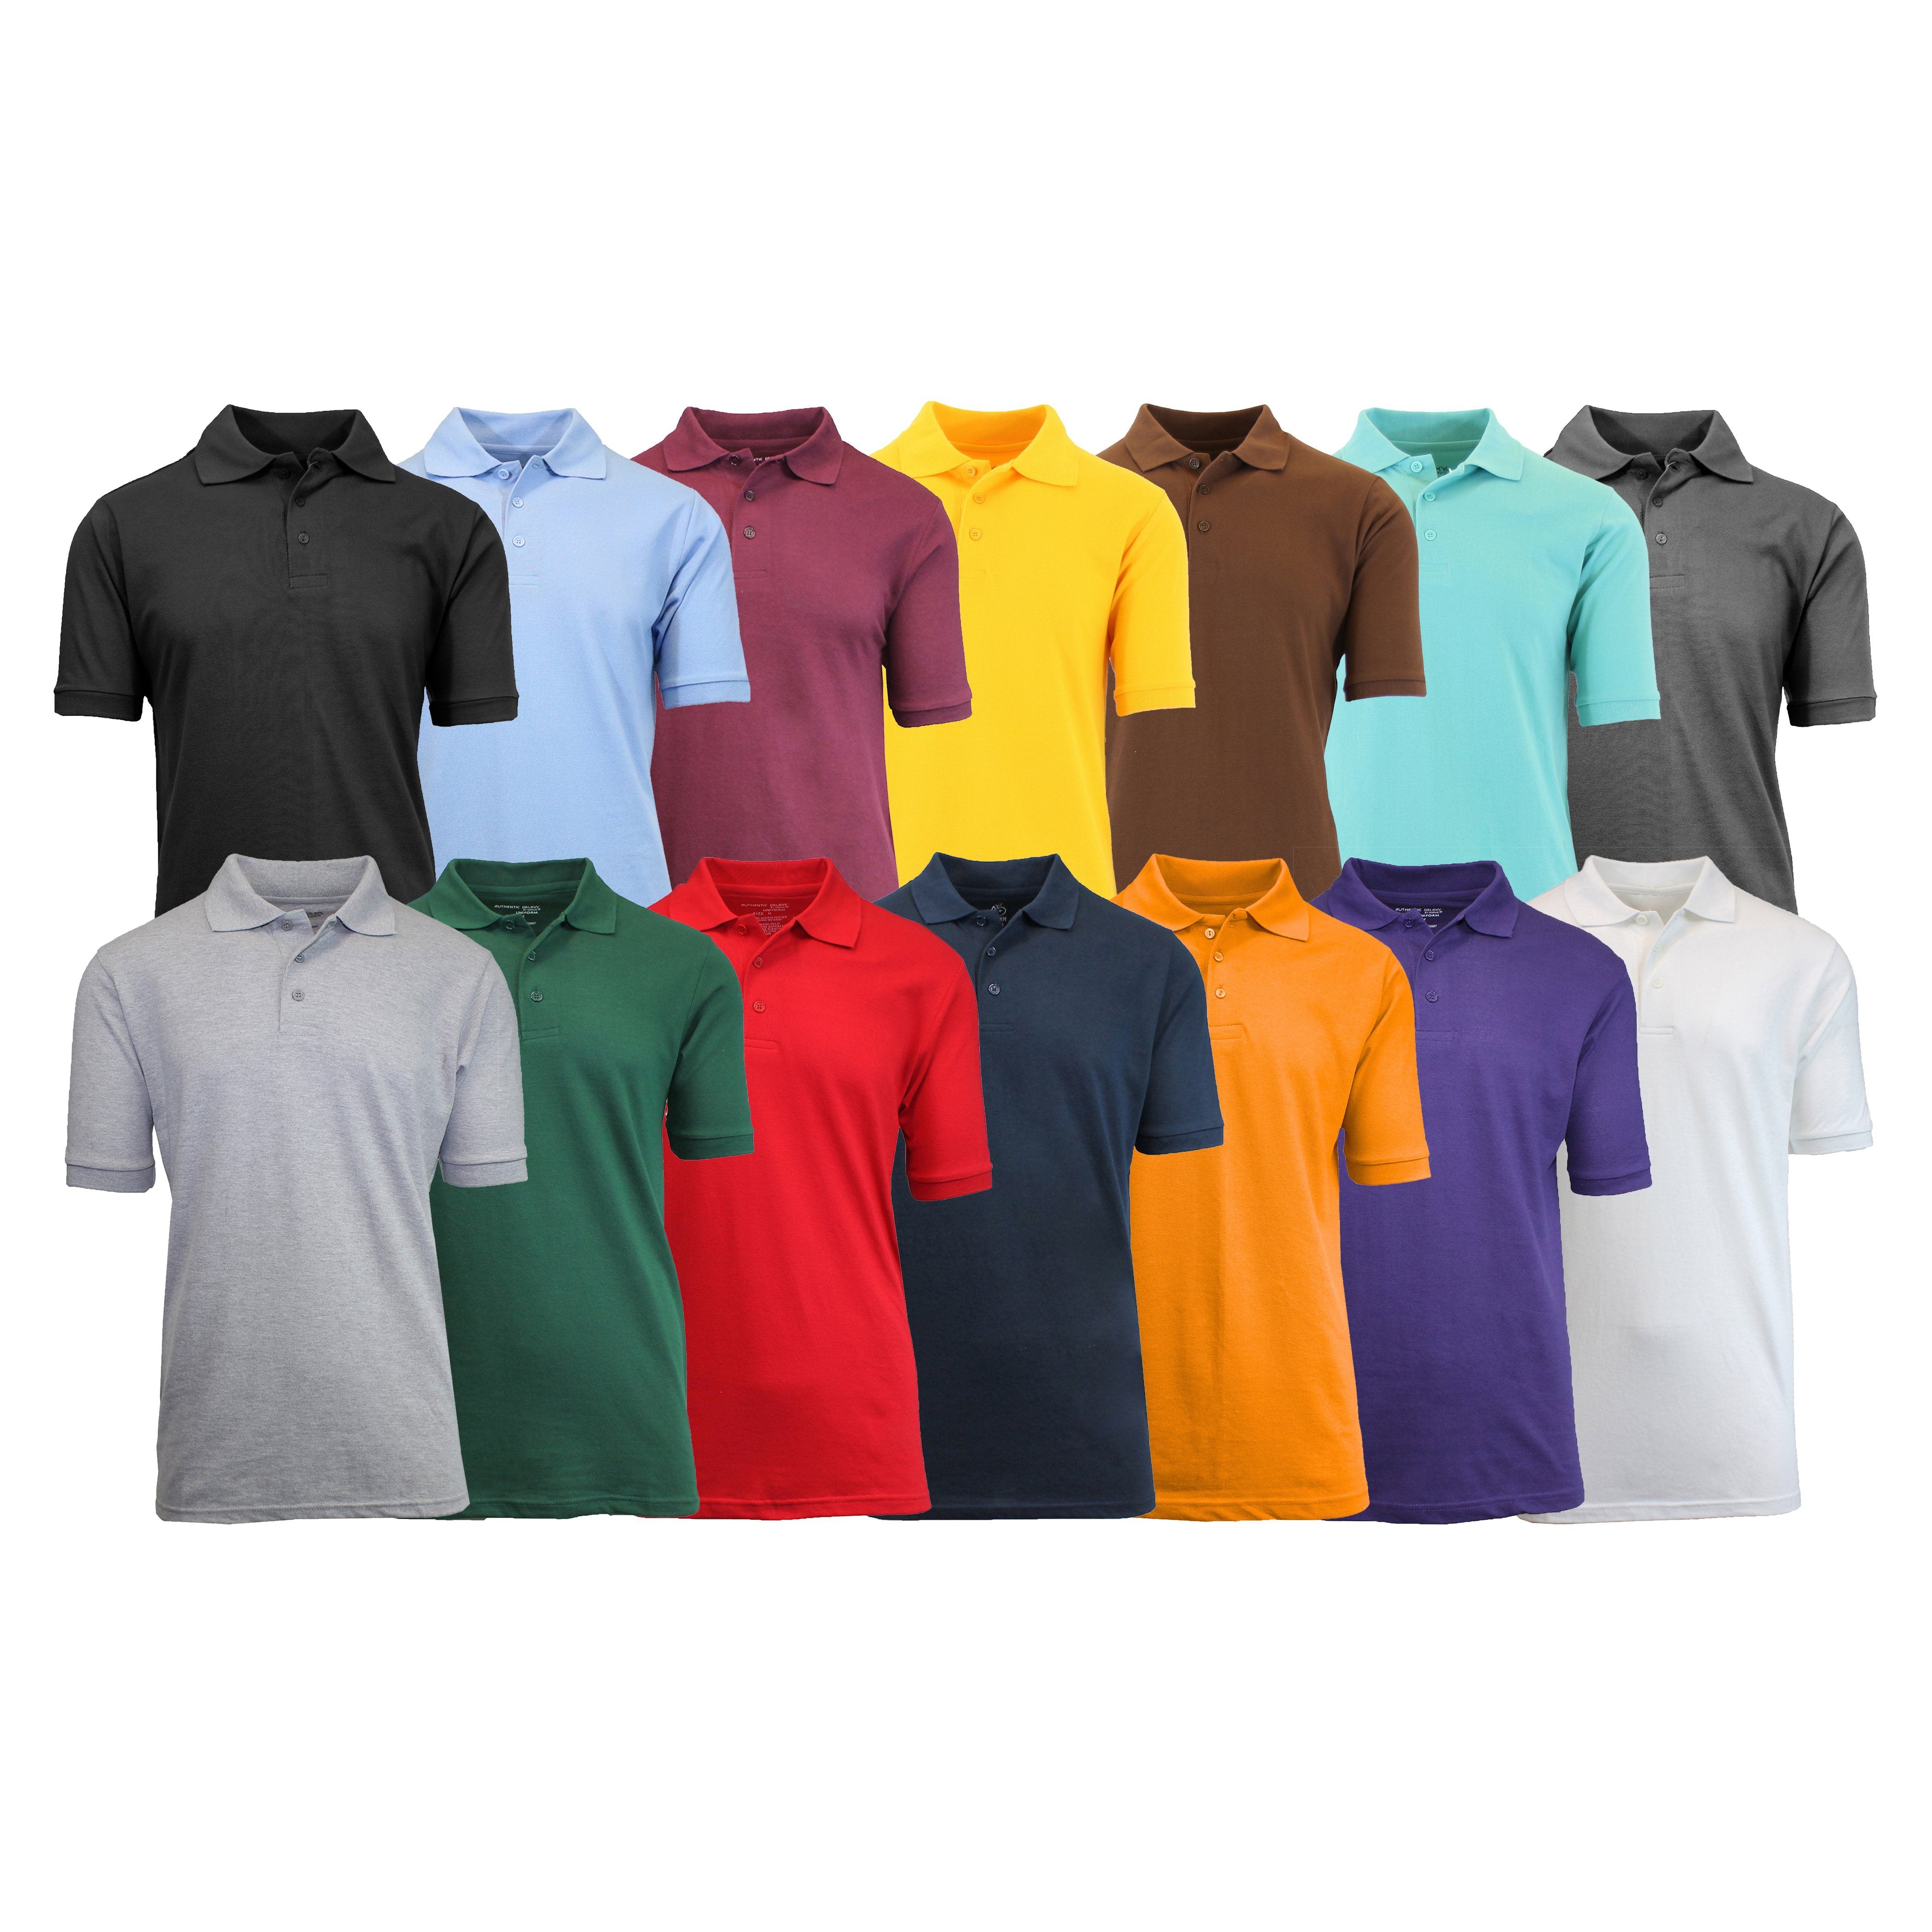 Galaxy by Harvic Men's Dry Fit Moisture-Wicking Polo Shirt 